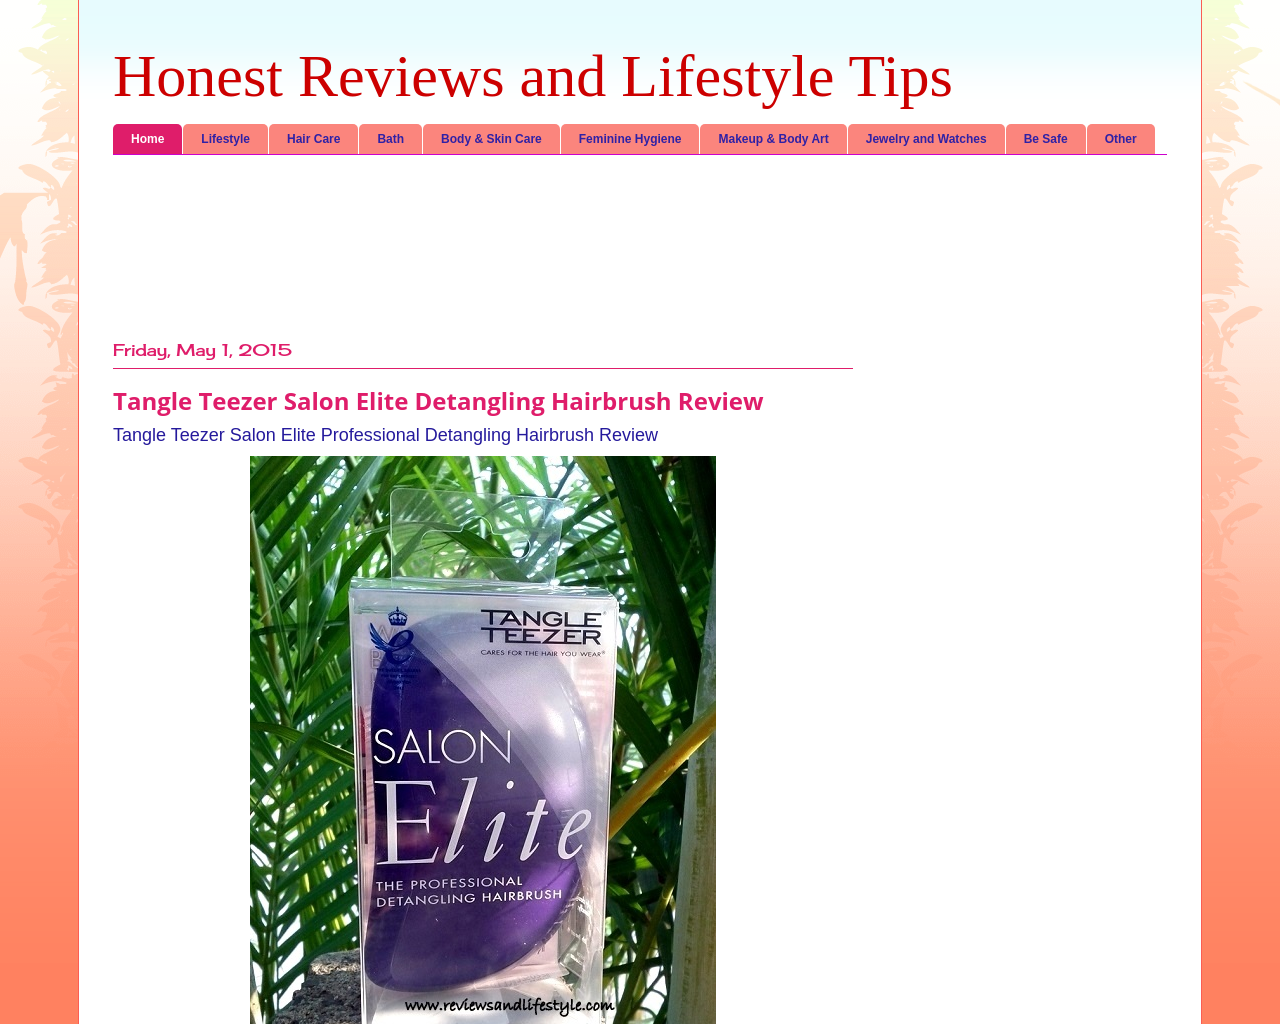 Honest Reviews and Lifestyle Tips